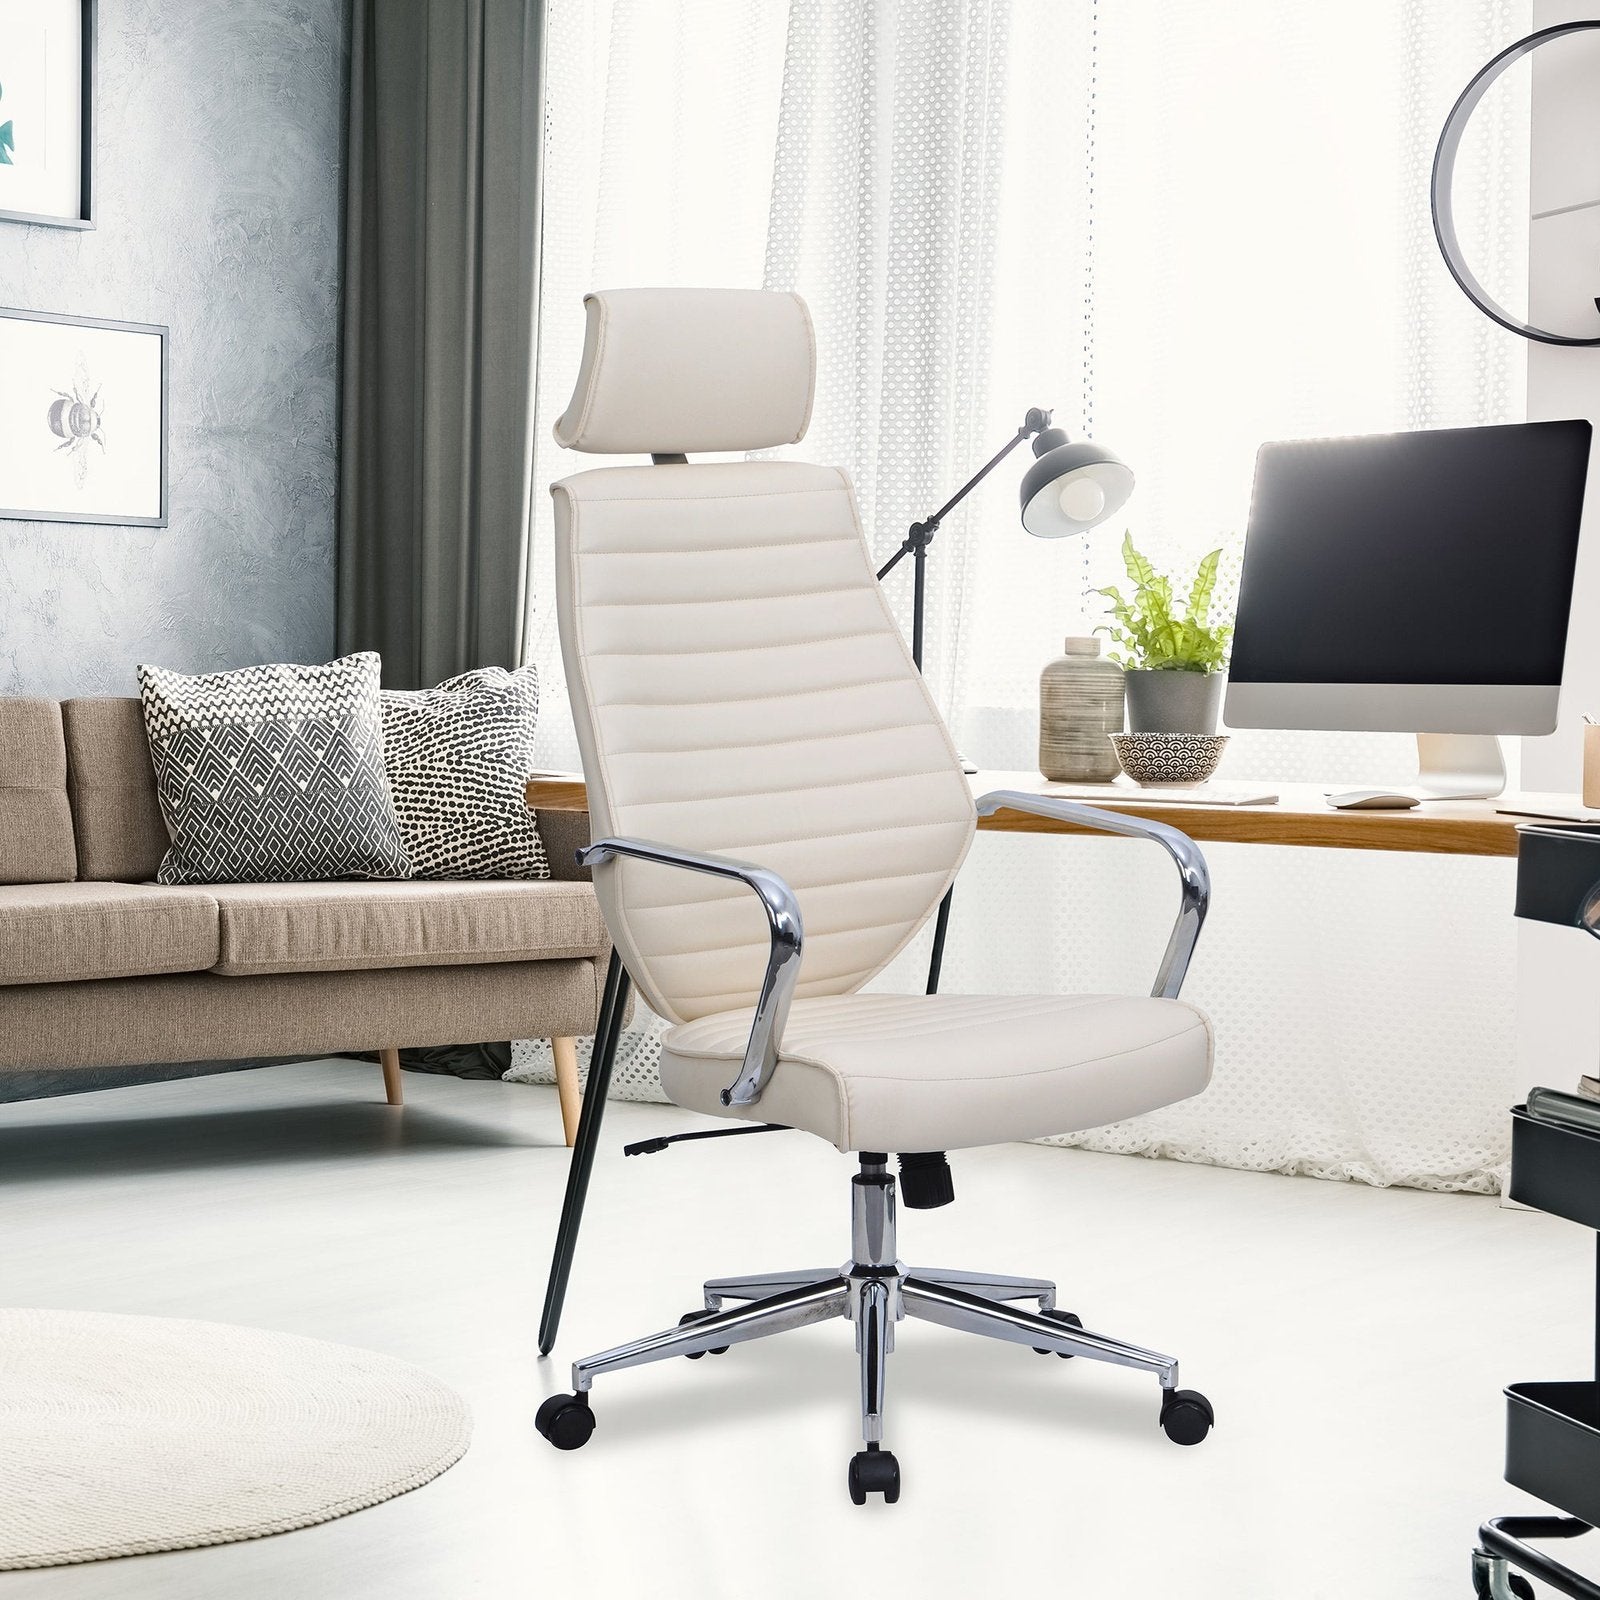 High Back Leather Effect Designer Executive Chair with Headrest, Armrests and Chrome Base - Office Products Online